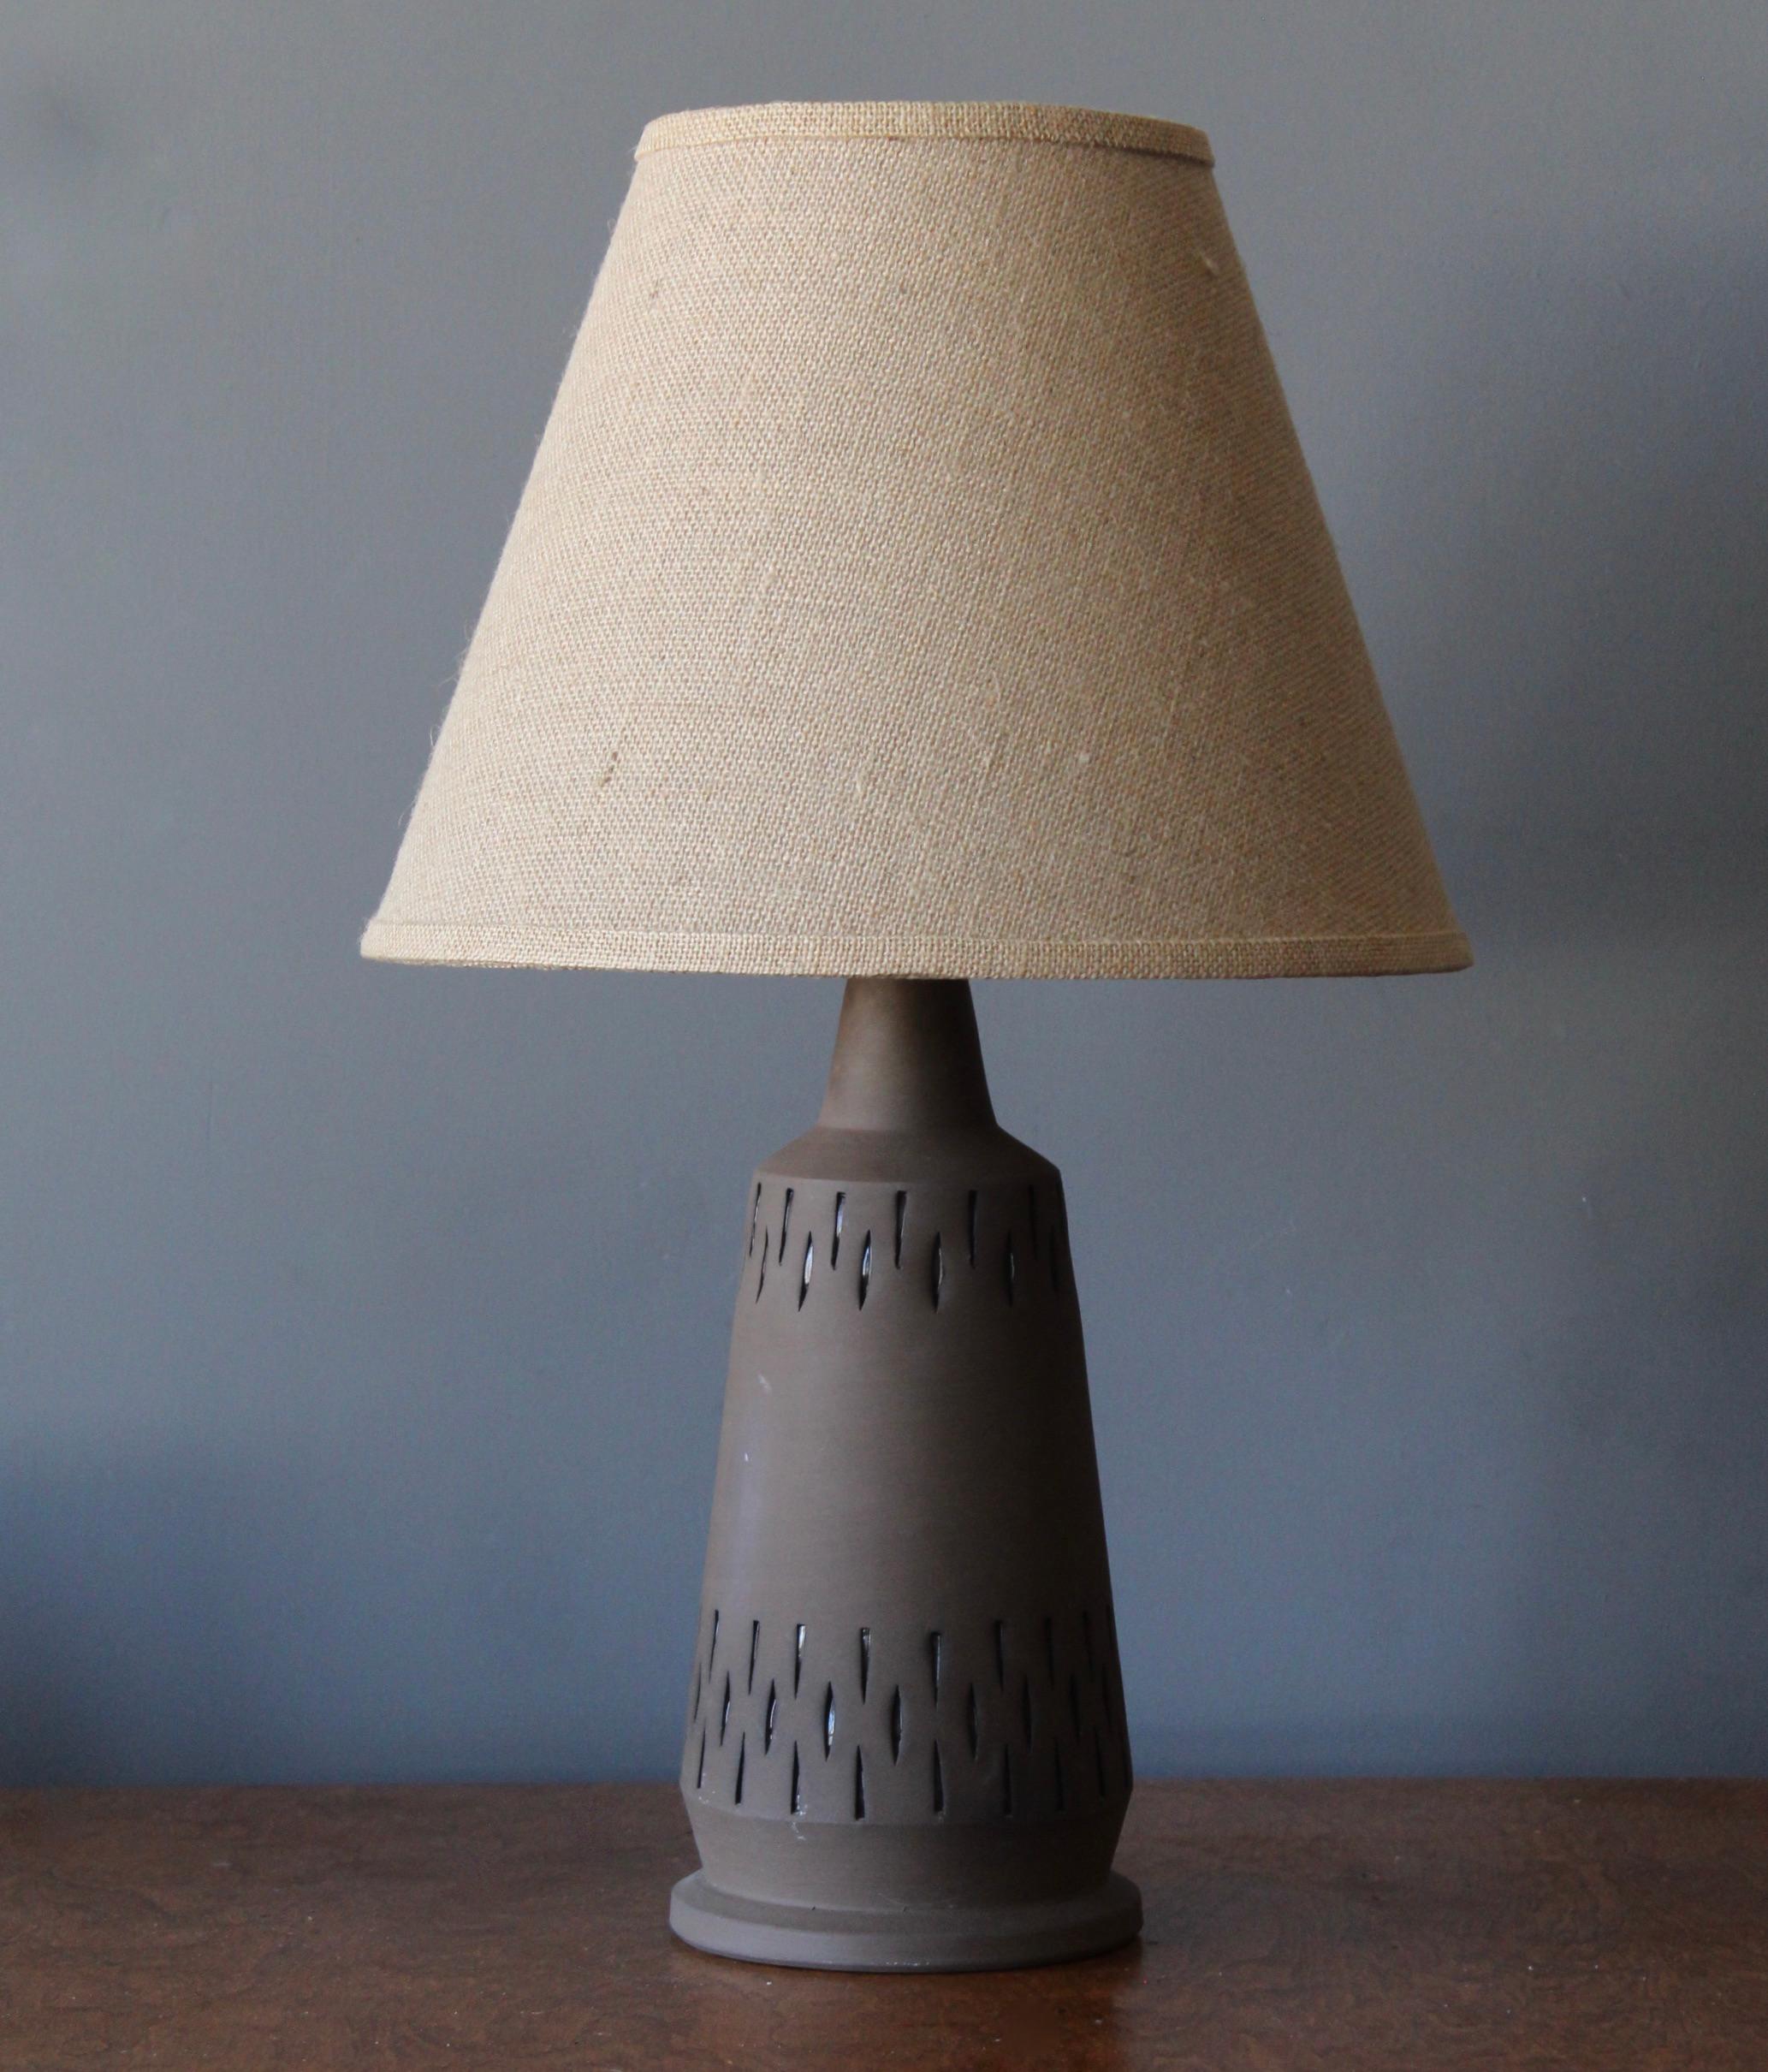 A table lamp, designed and produced by NILA, Alingsås Sweden, 1960s.

Handmade in stoneware. Stamped to underside. Features matte finish and simple incised ornamentation.

Stated dimensions exclude lampshade, height includes socket. Sold without